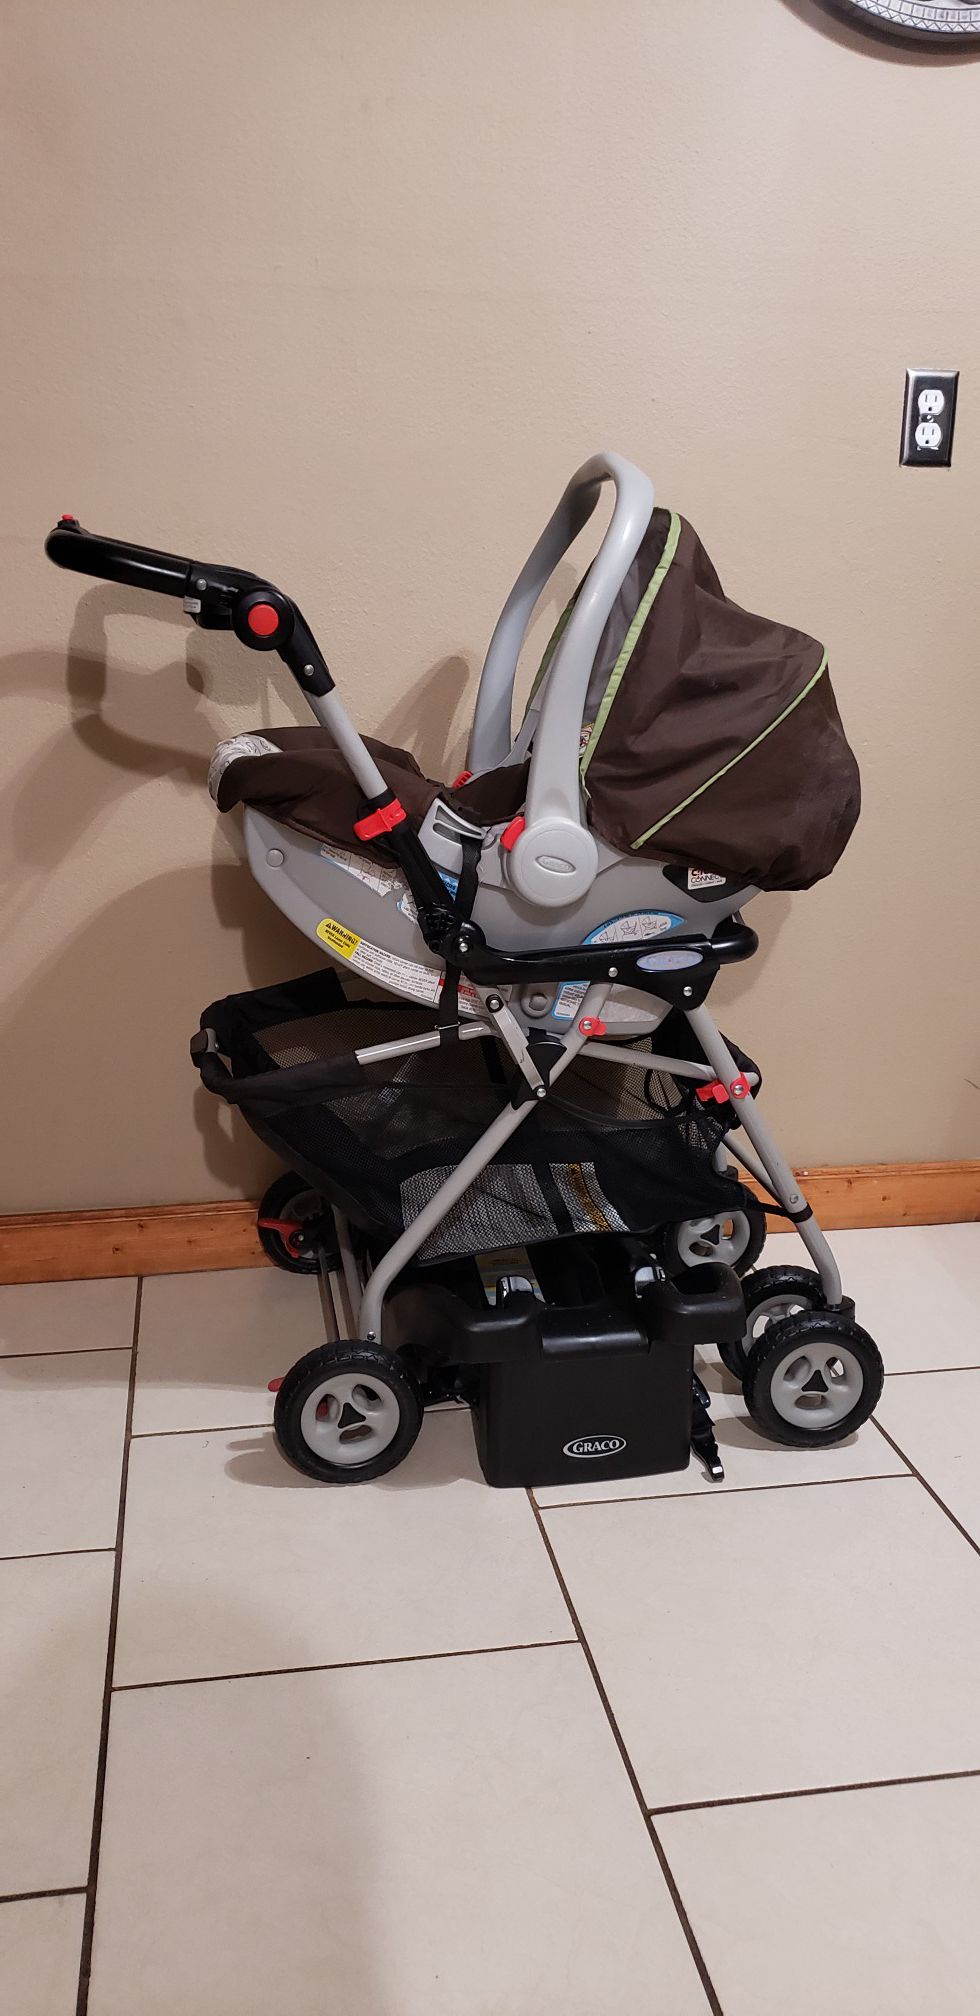 Graco click connect car seat & stroller with base